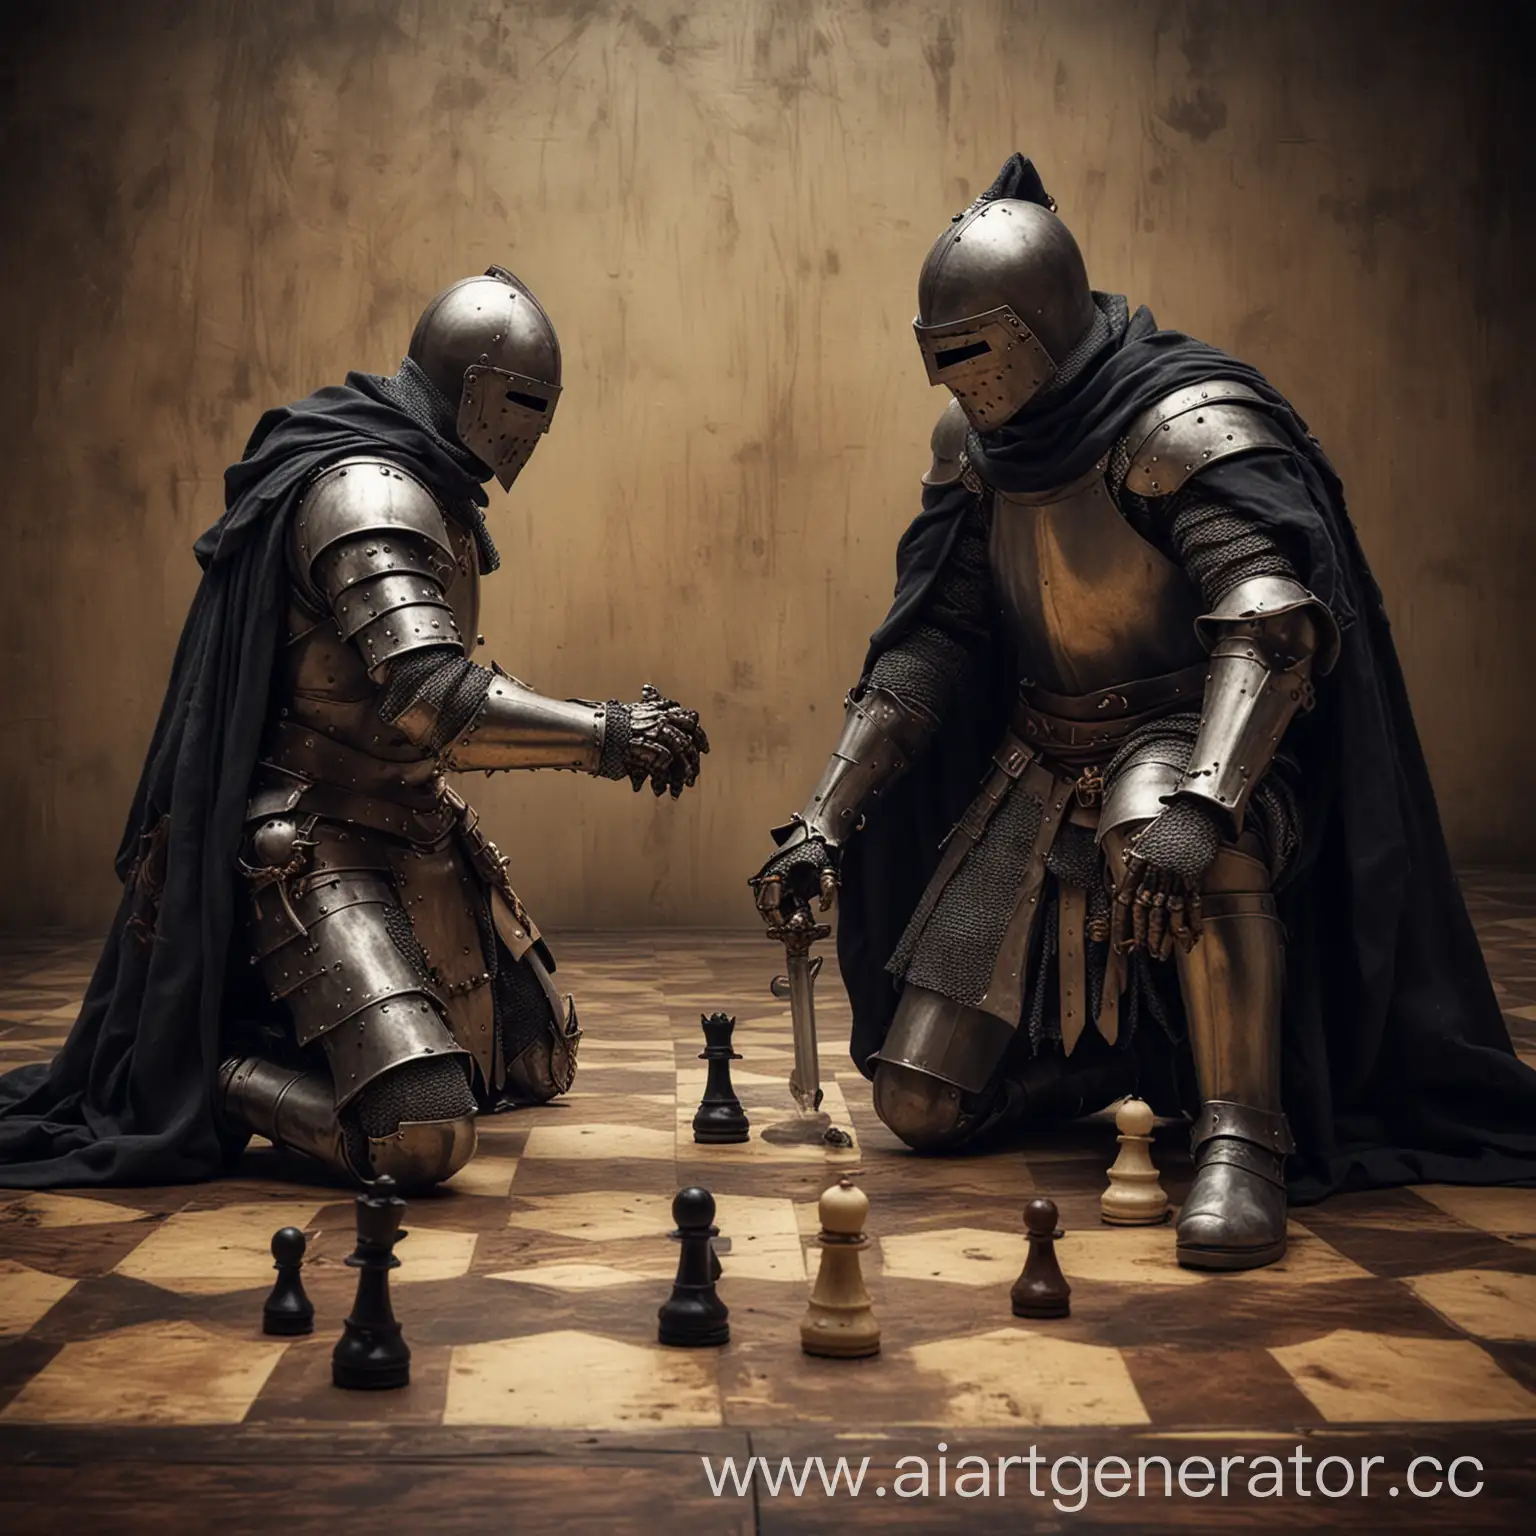 Fearful-Knight-Defended-by-Brave-Pawn-in-Medieval-Chess-Game